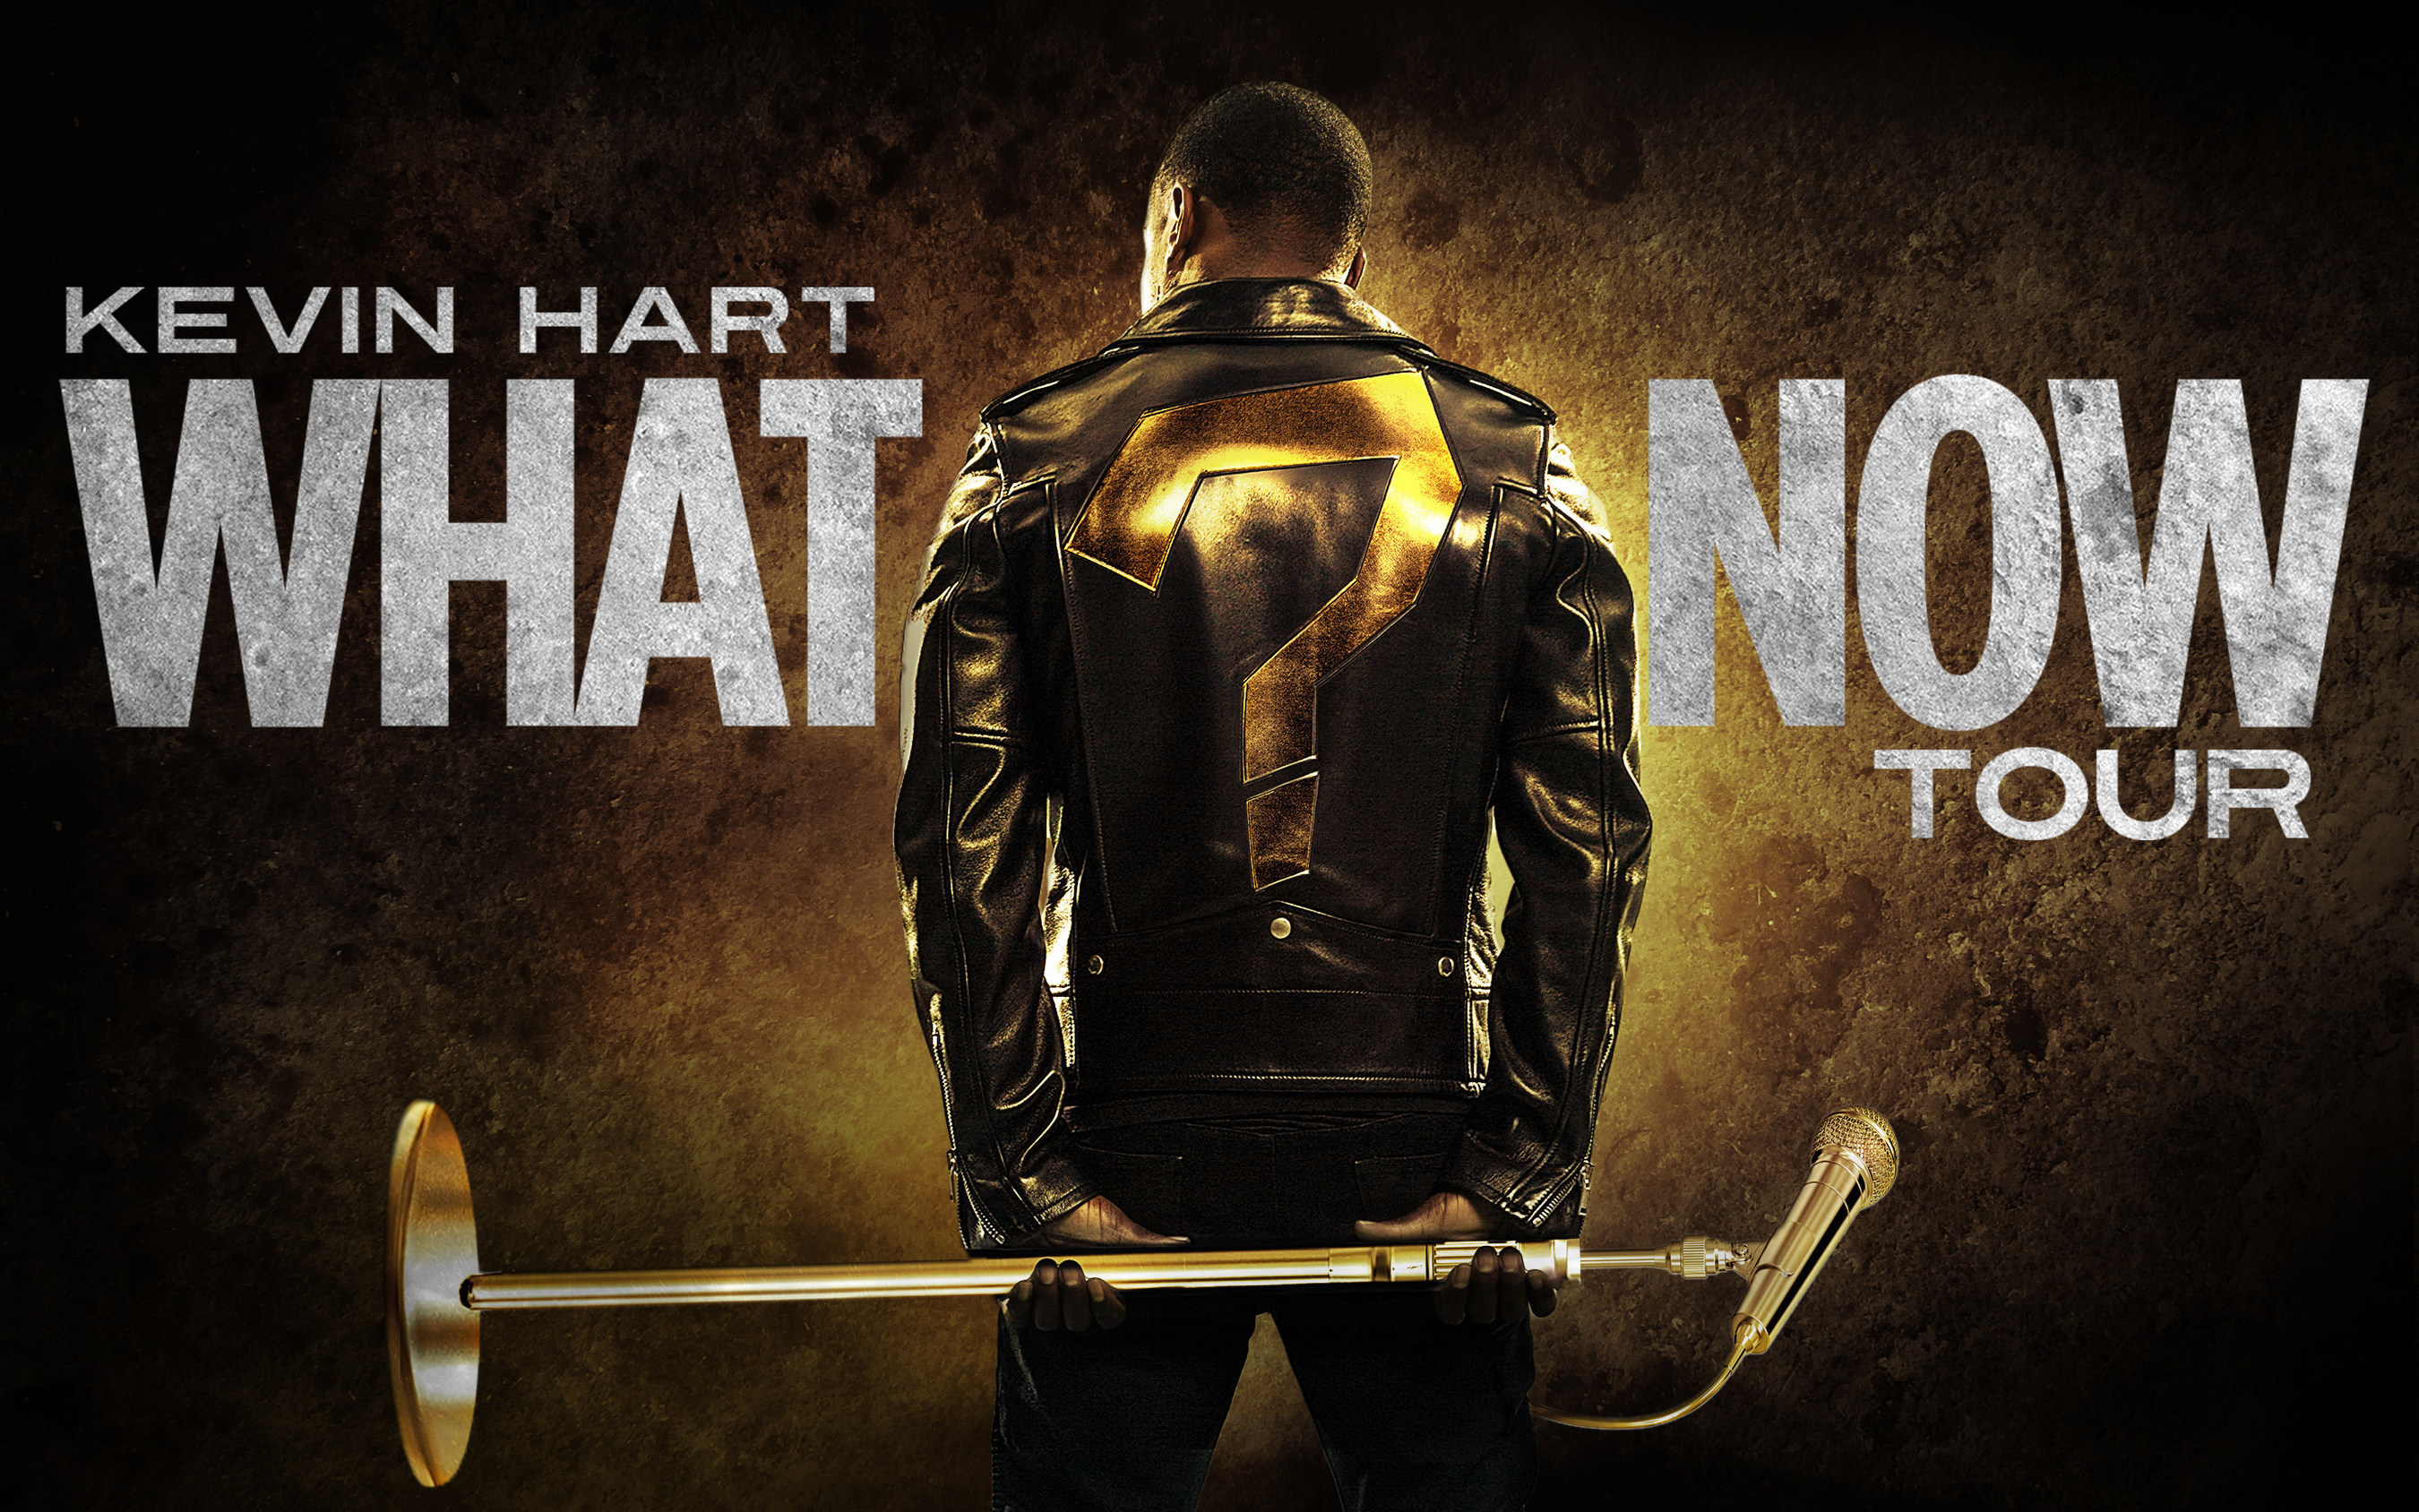 Kevin Hart Reas Biggest Comedy Tour In History With The What Now